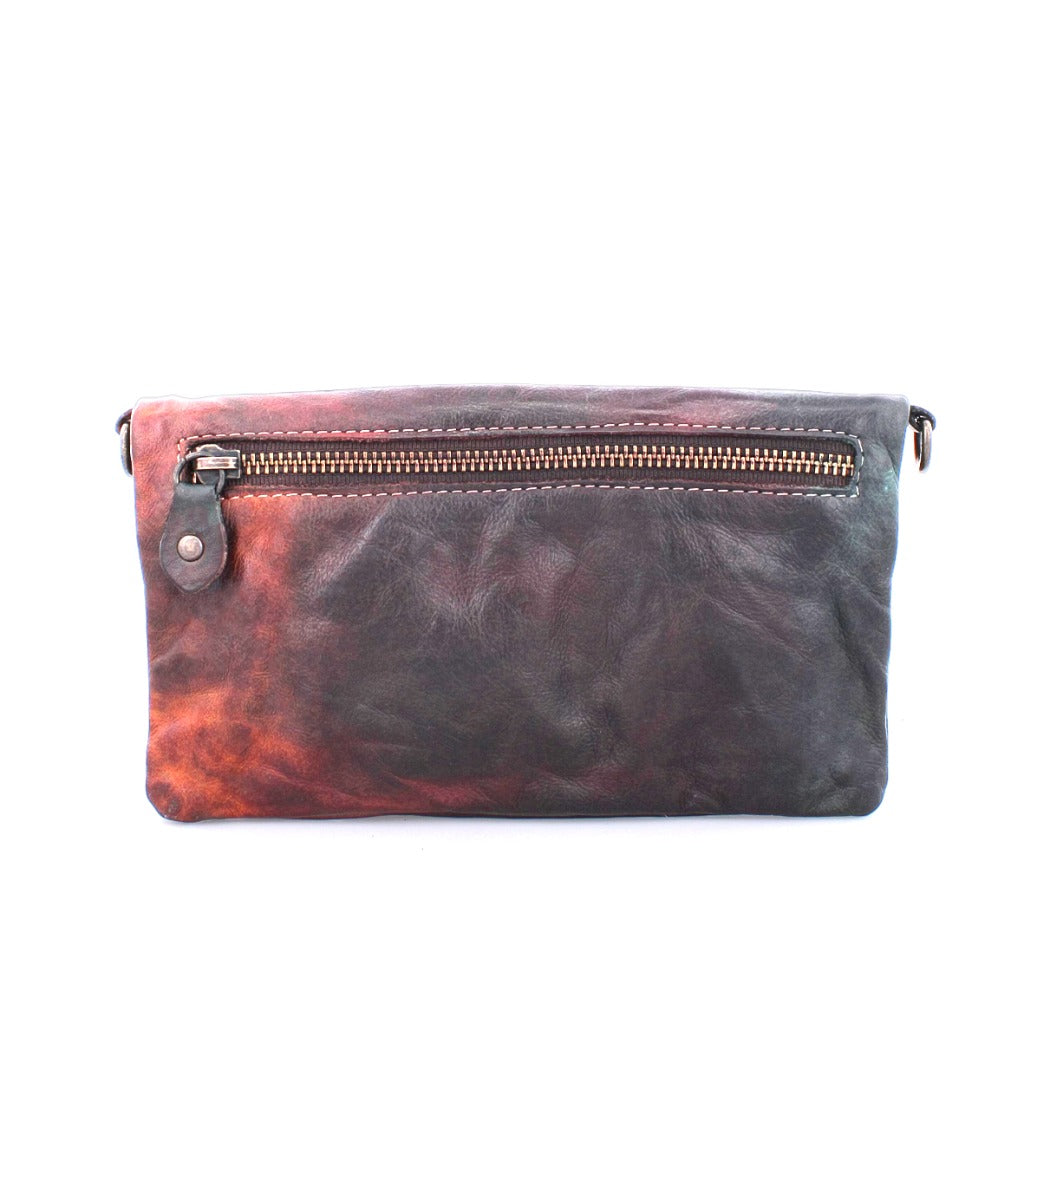 A Cadence multi-colored leather clutch bag with zipper by Bed Stu.